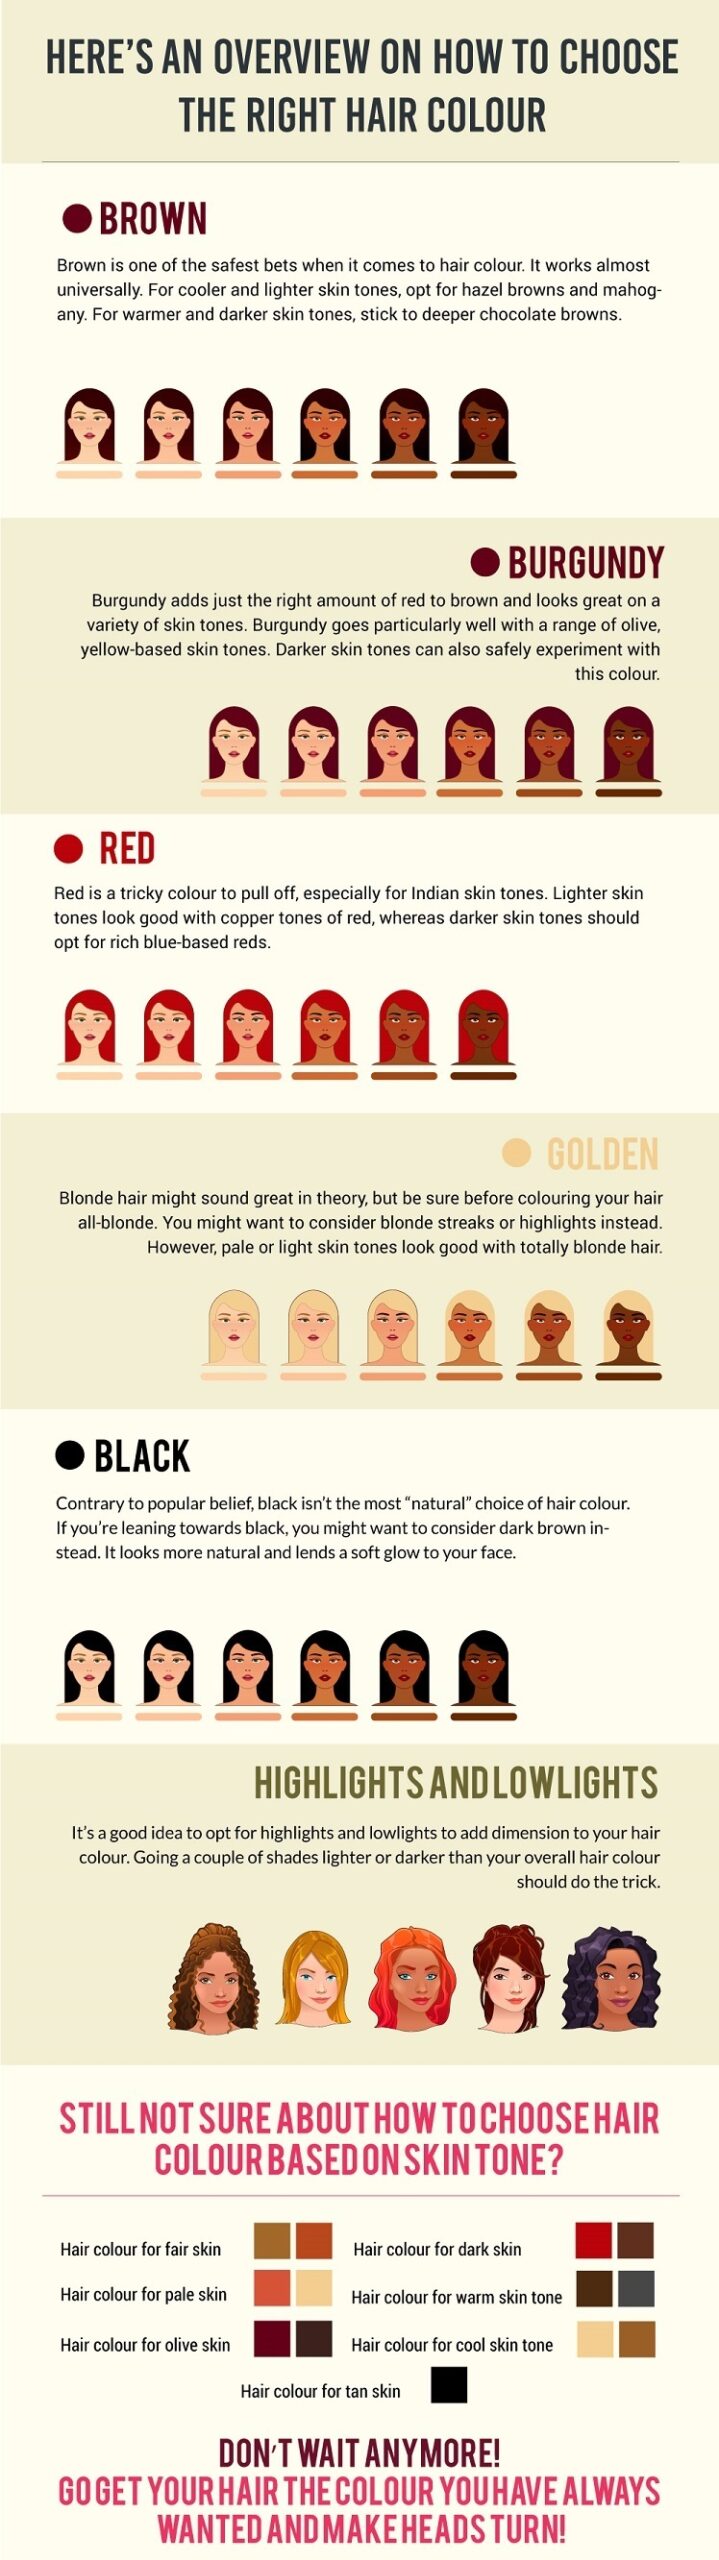 how to choose hair color based on skin tone